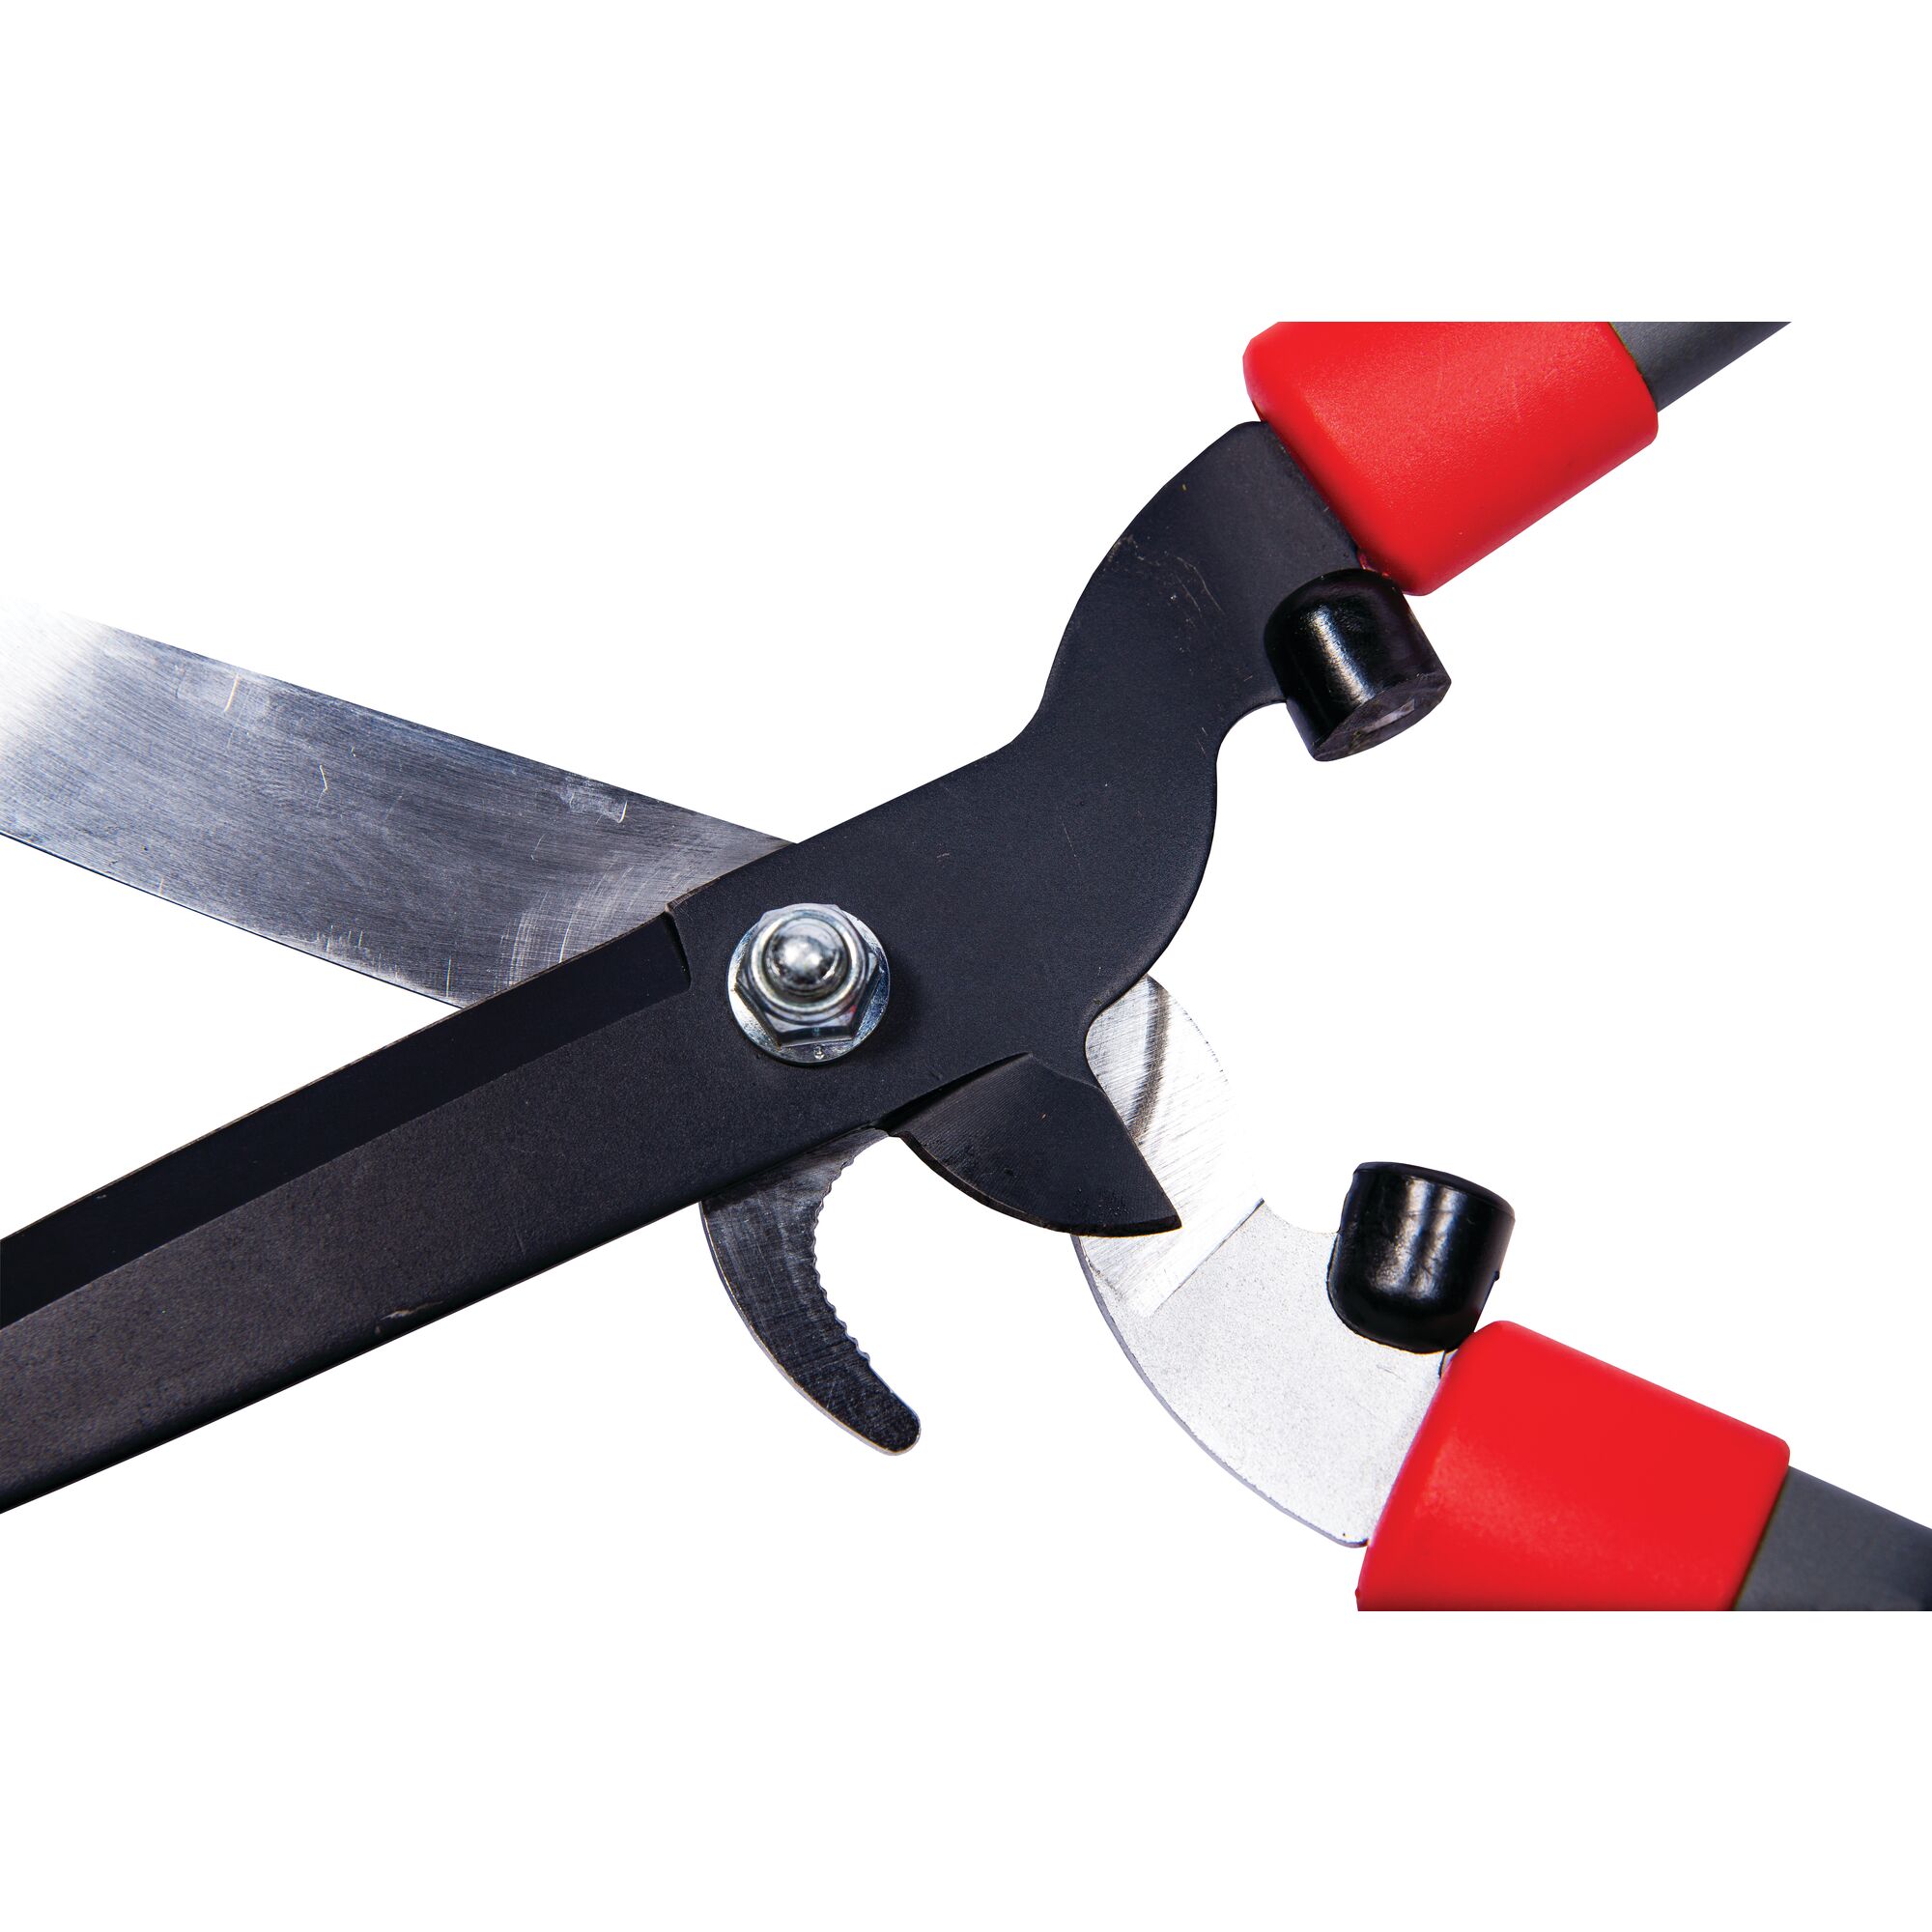 2 in 1 tool feature of multi purpose hedge shears.